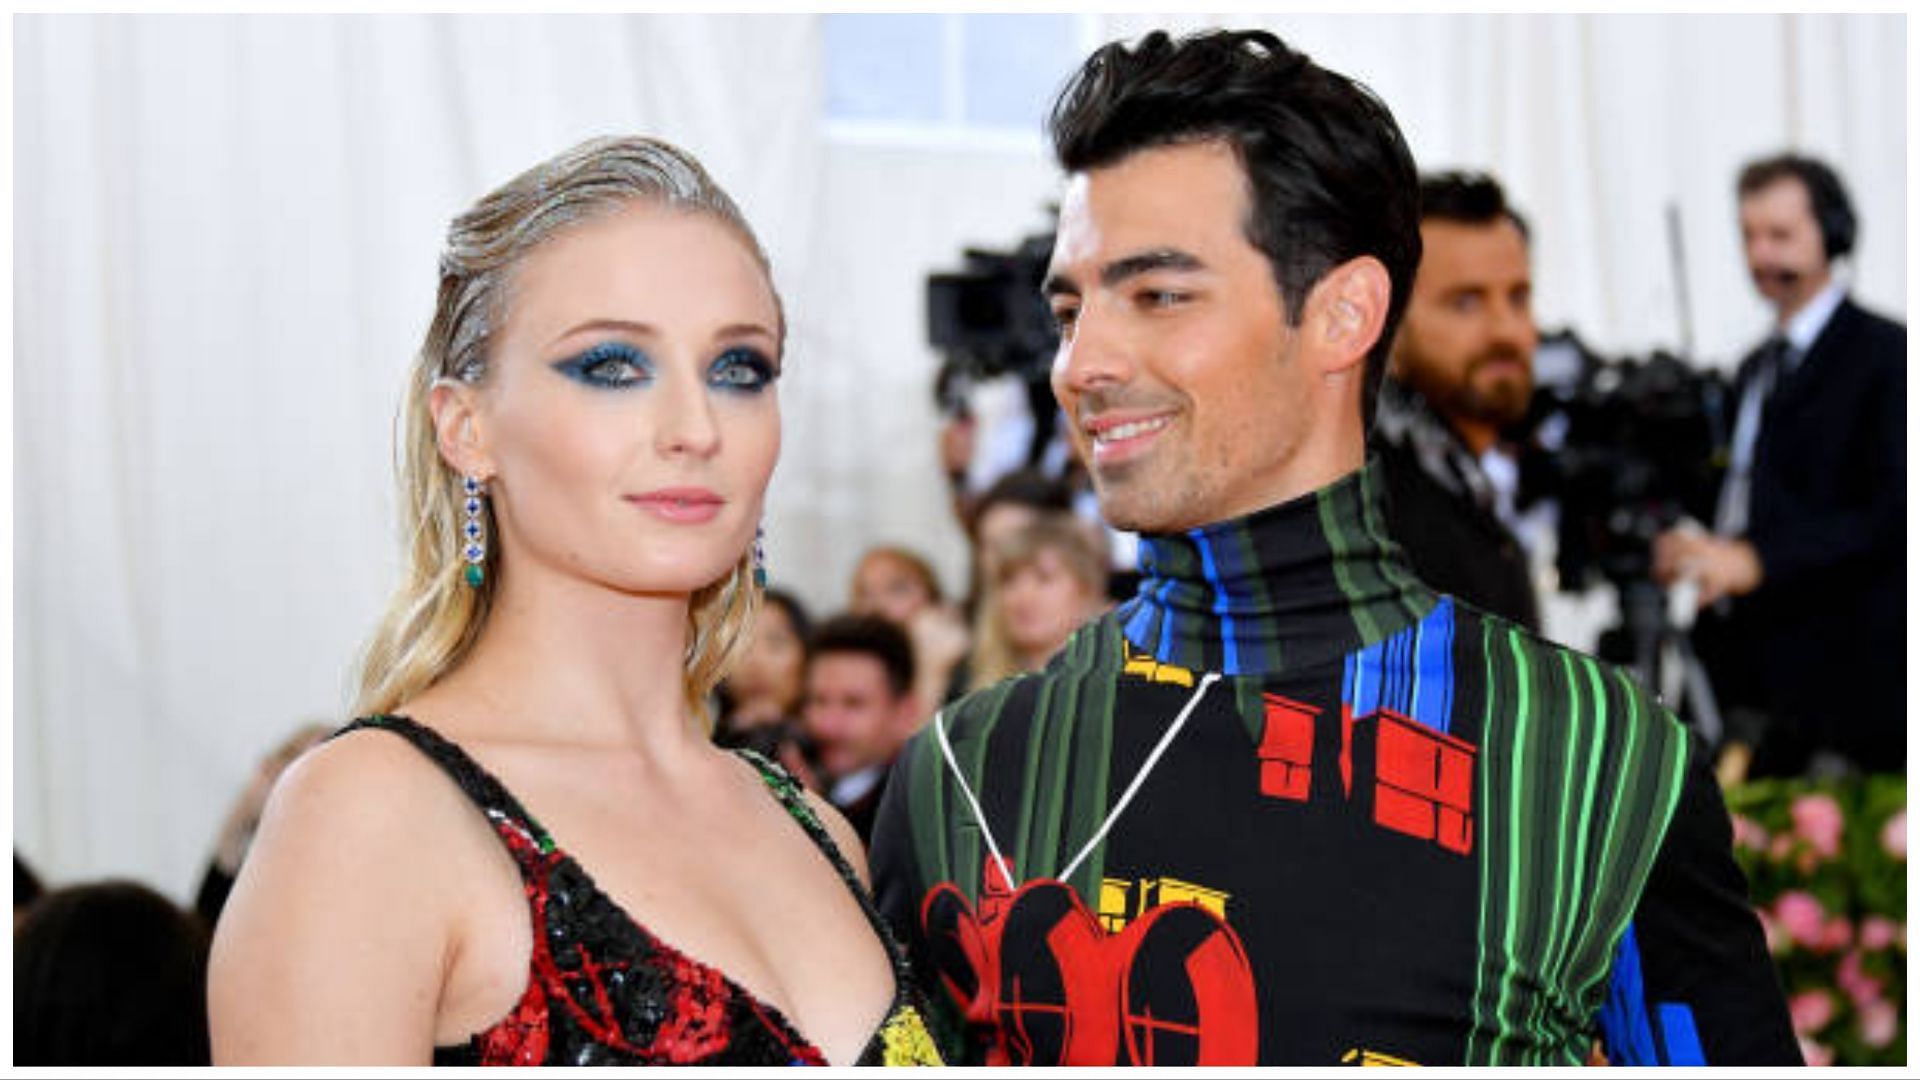 Sophie and Joe have been together for four years (Image via Getty Images)